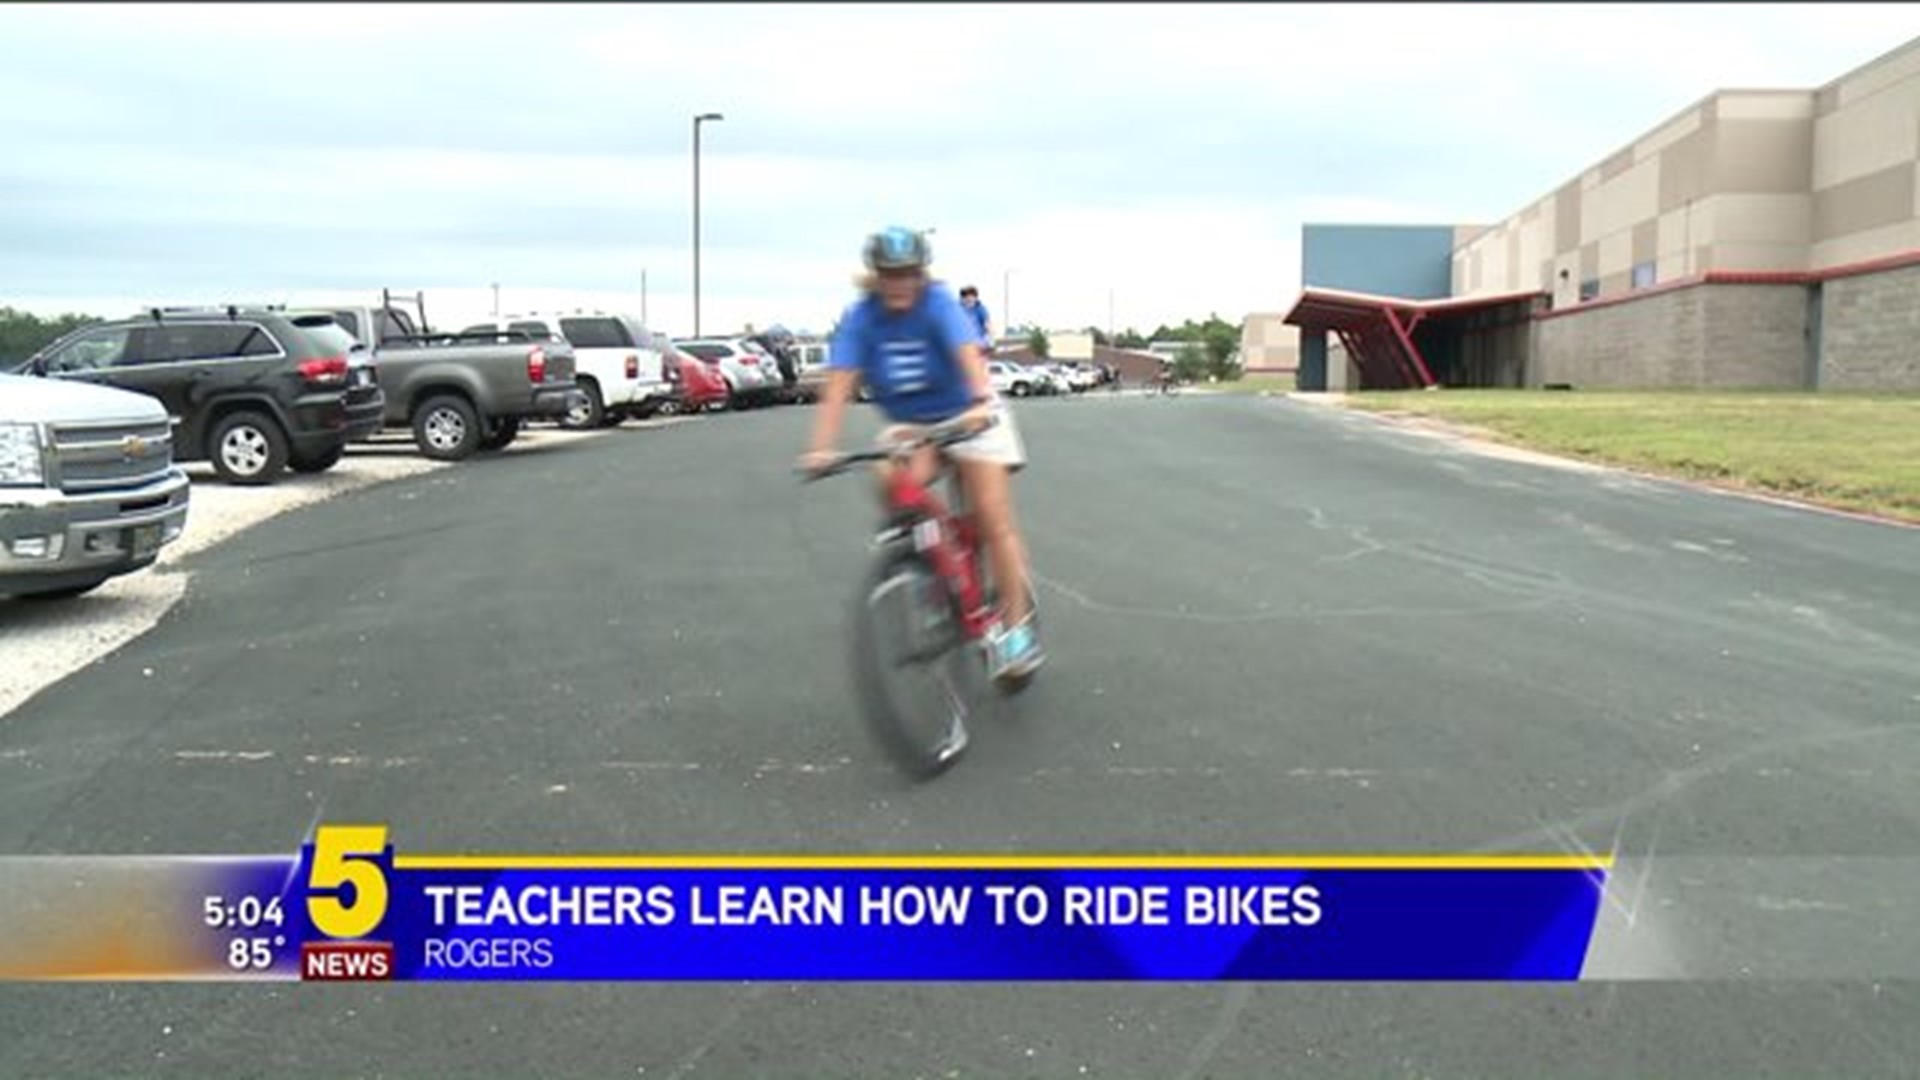 Teachers Learn How To Ride For The Upcoming School Year